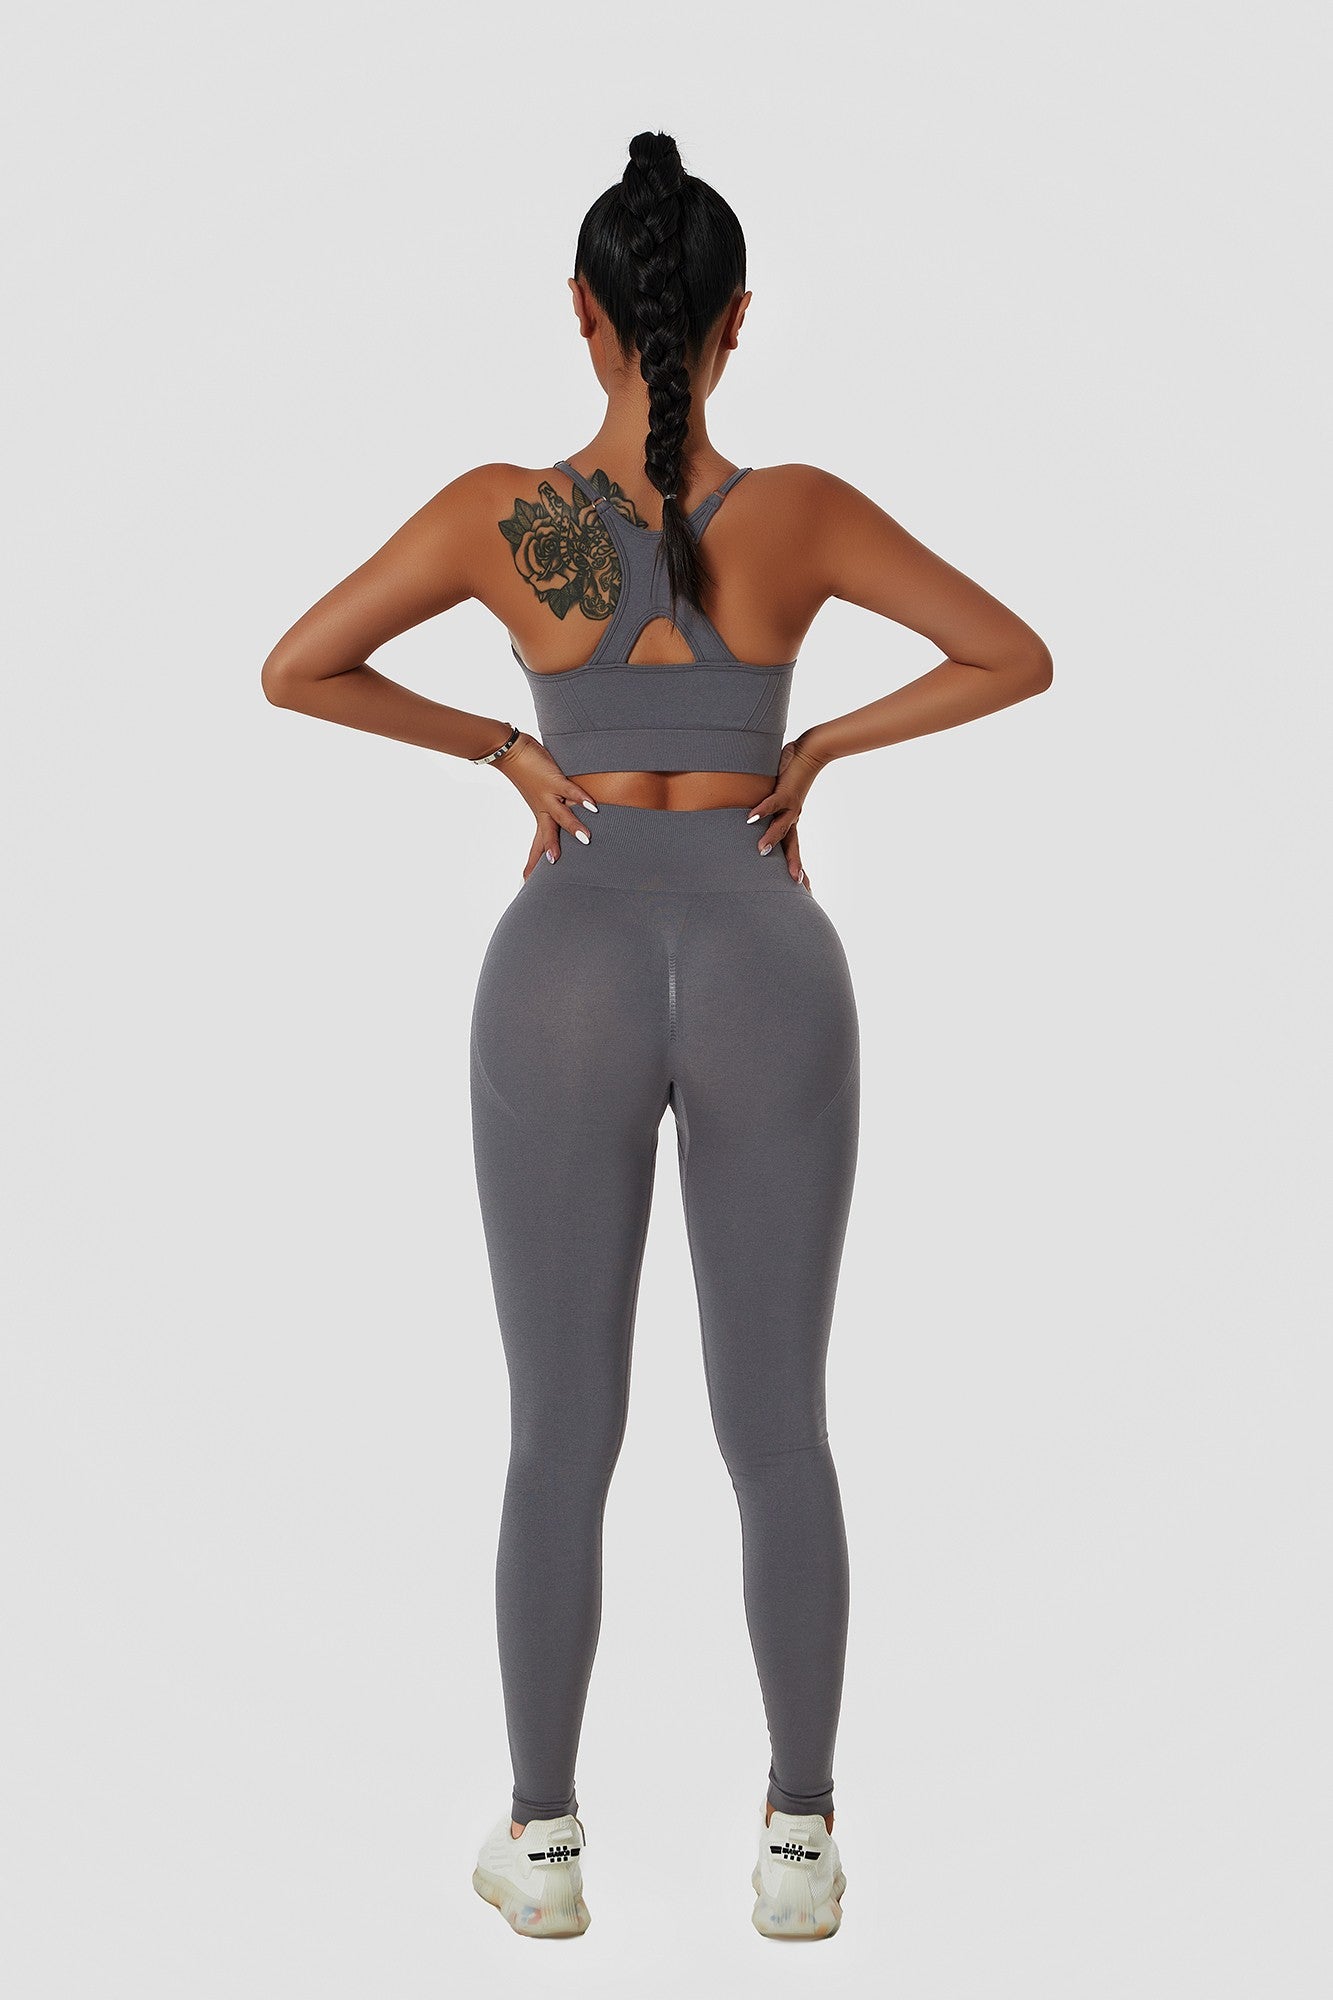 RQYYD Clearance Women Scrunch Butt Lifting Leggings Seamless High Waisted  Workout Yoga Pants Solid Ruched Elastic Tights(Gray,XXL) 